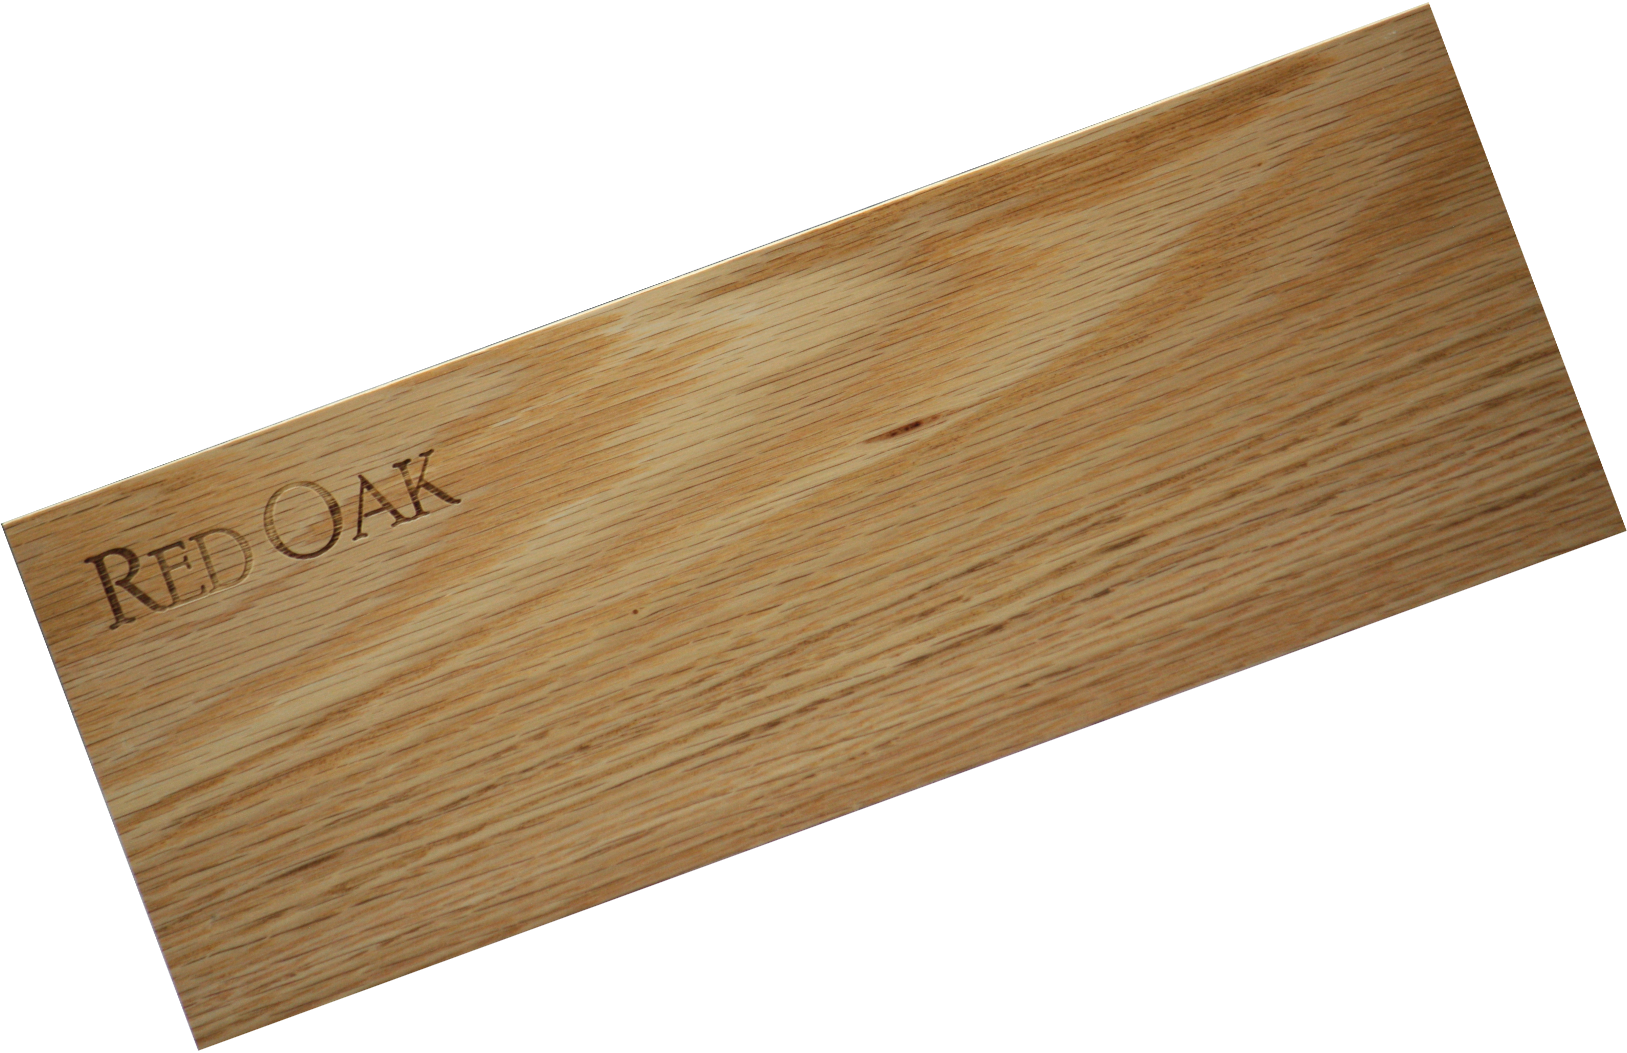 Wood Strip (Red Oak / Hickory) 12" x 19" x  (1/16", 3/32", 1/8", 3/16" or 1/4") 